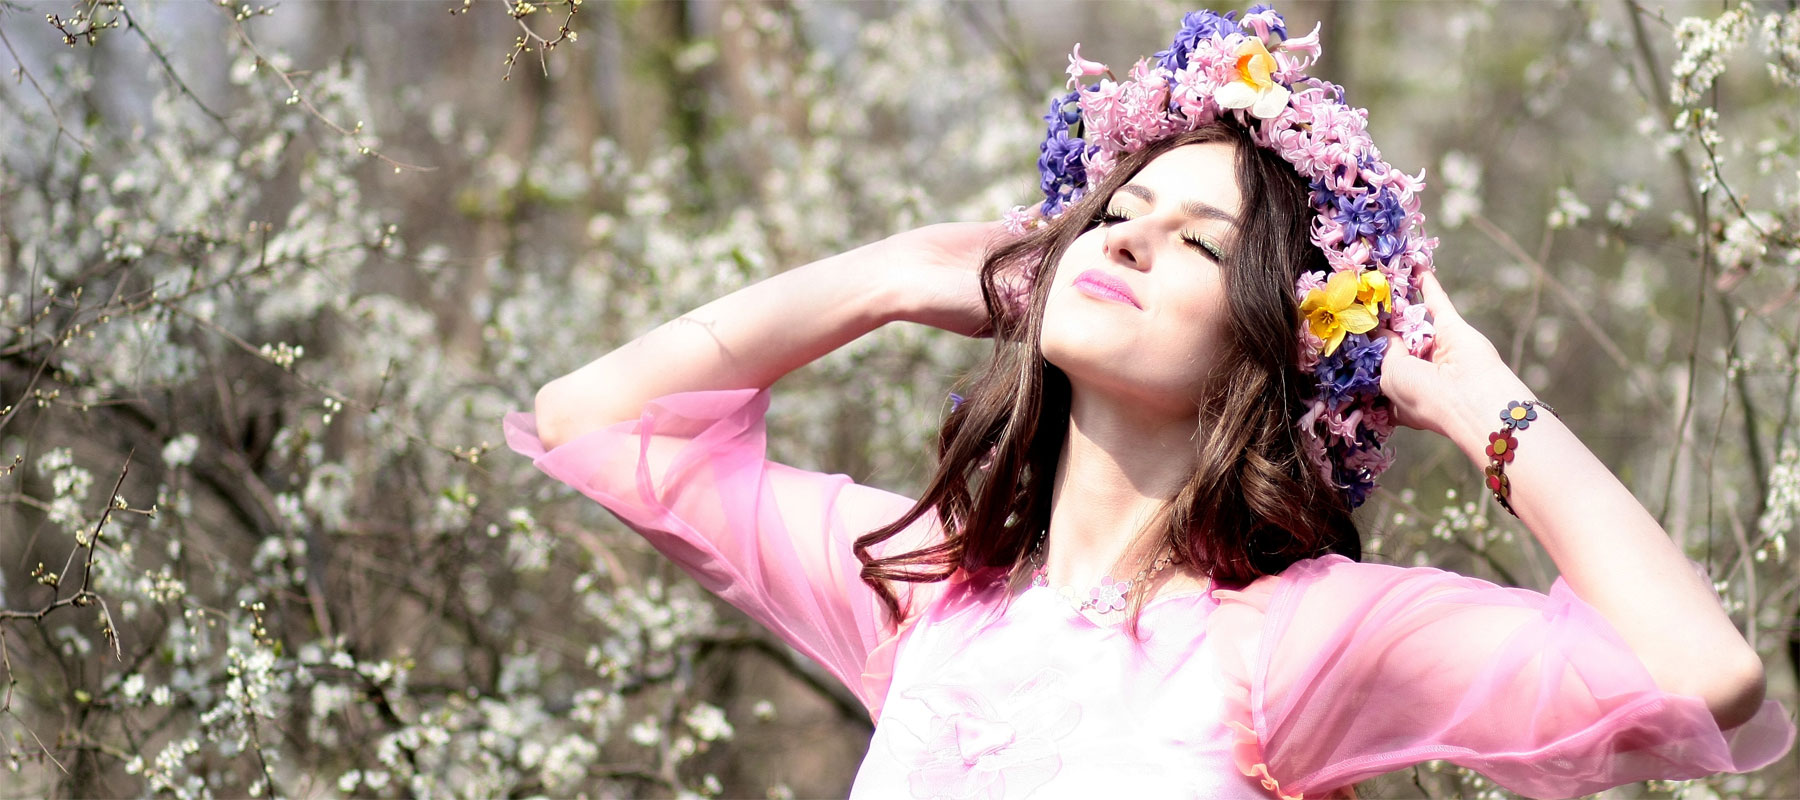 Image of success. Photo of quirky, flower-child woman with face raised to sunshine, expression of peace and happiness.